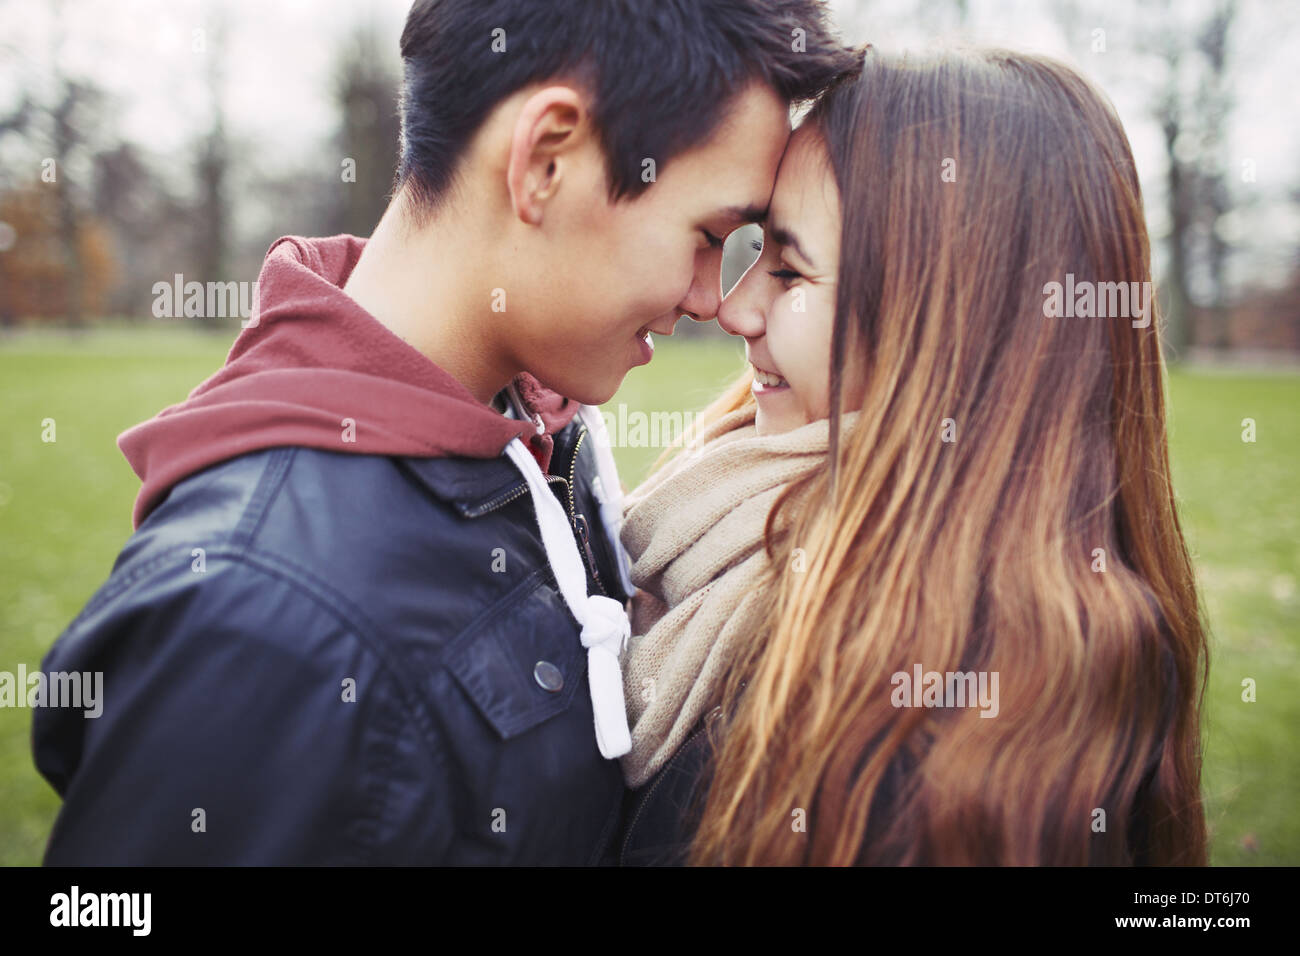 Close up of cute teenage couple in love sharing a special moment. Romantic young man and woman outdoors in park. Stock Photo